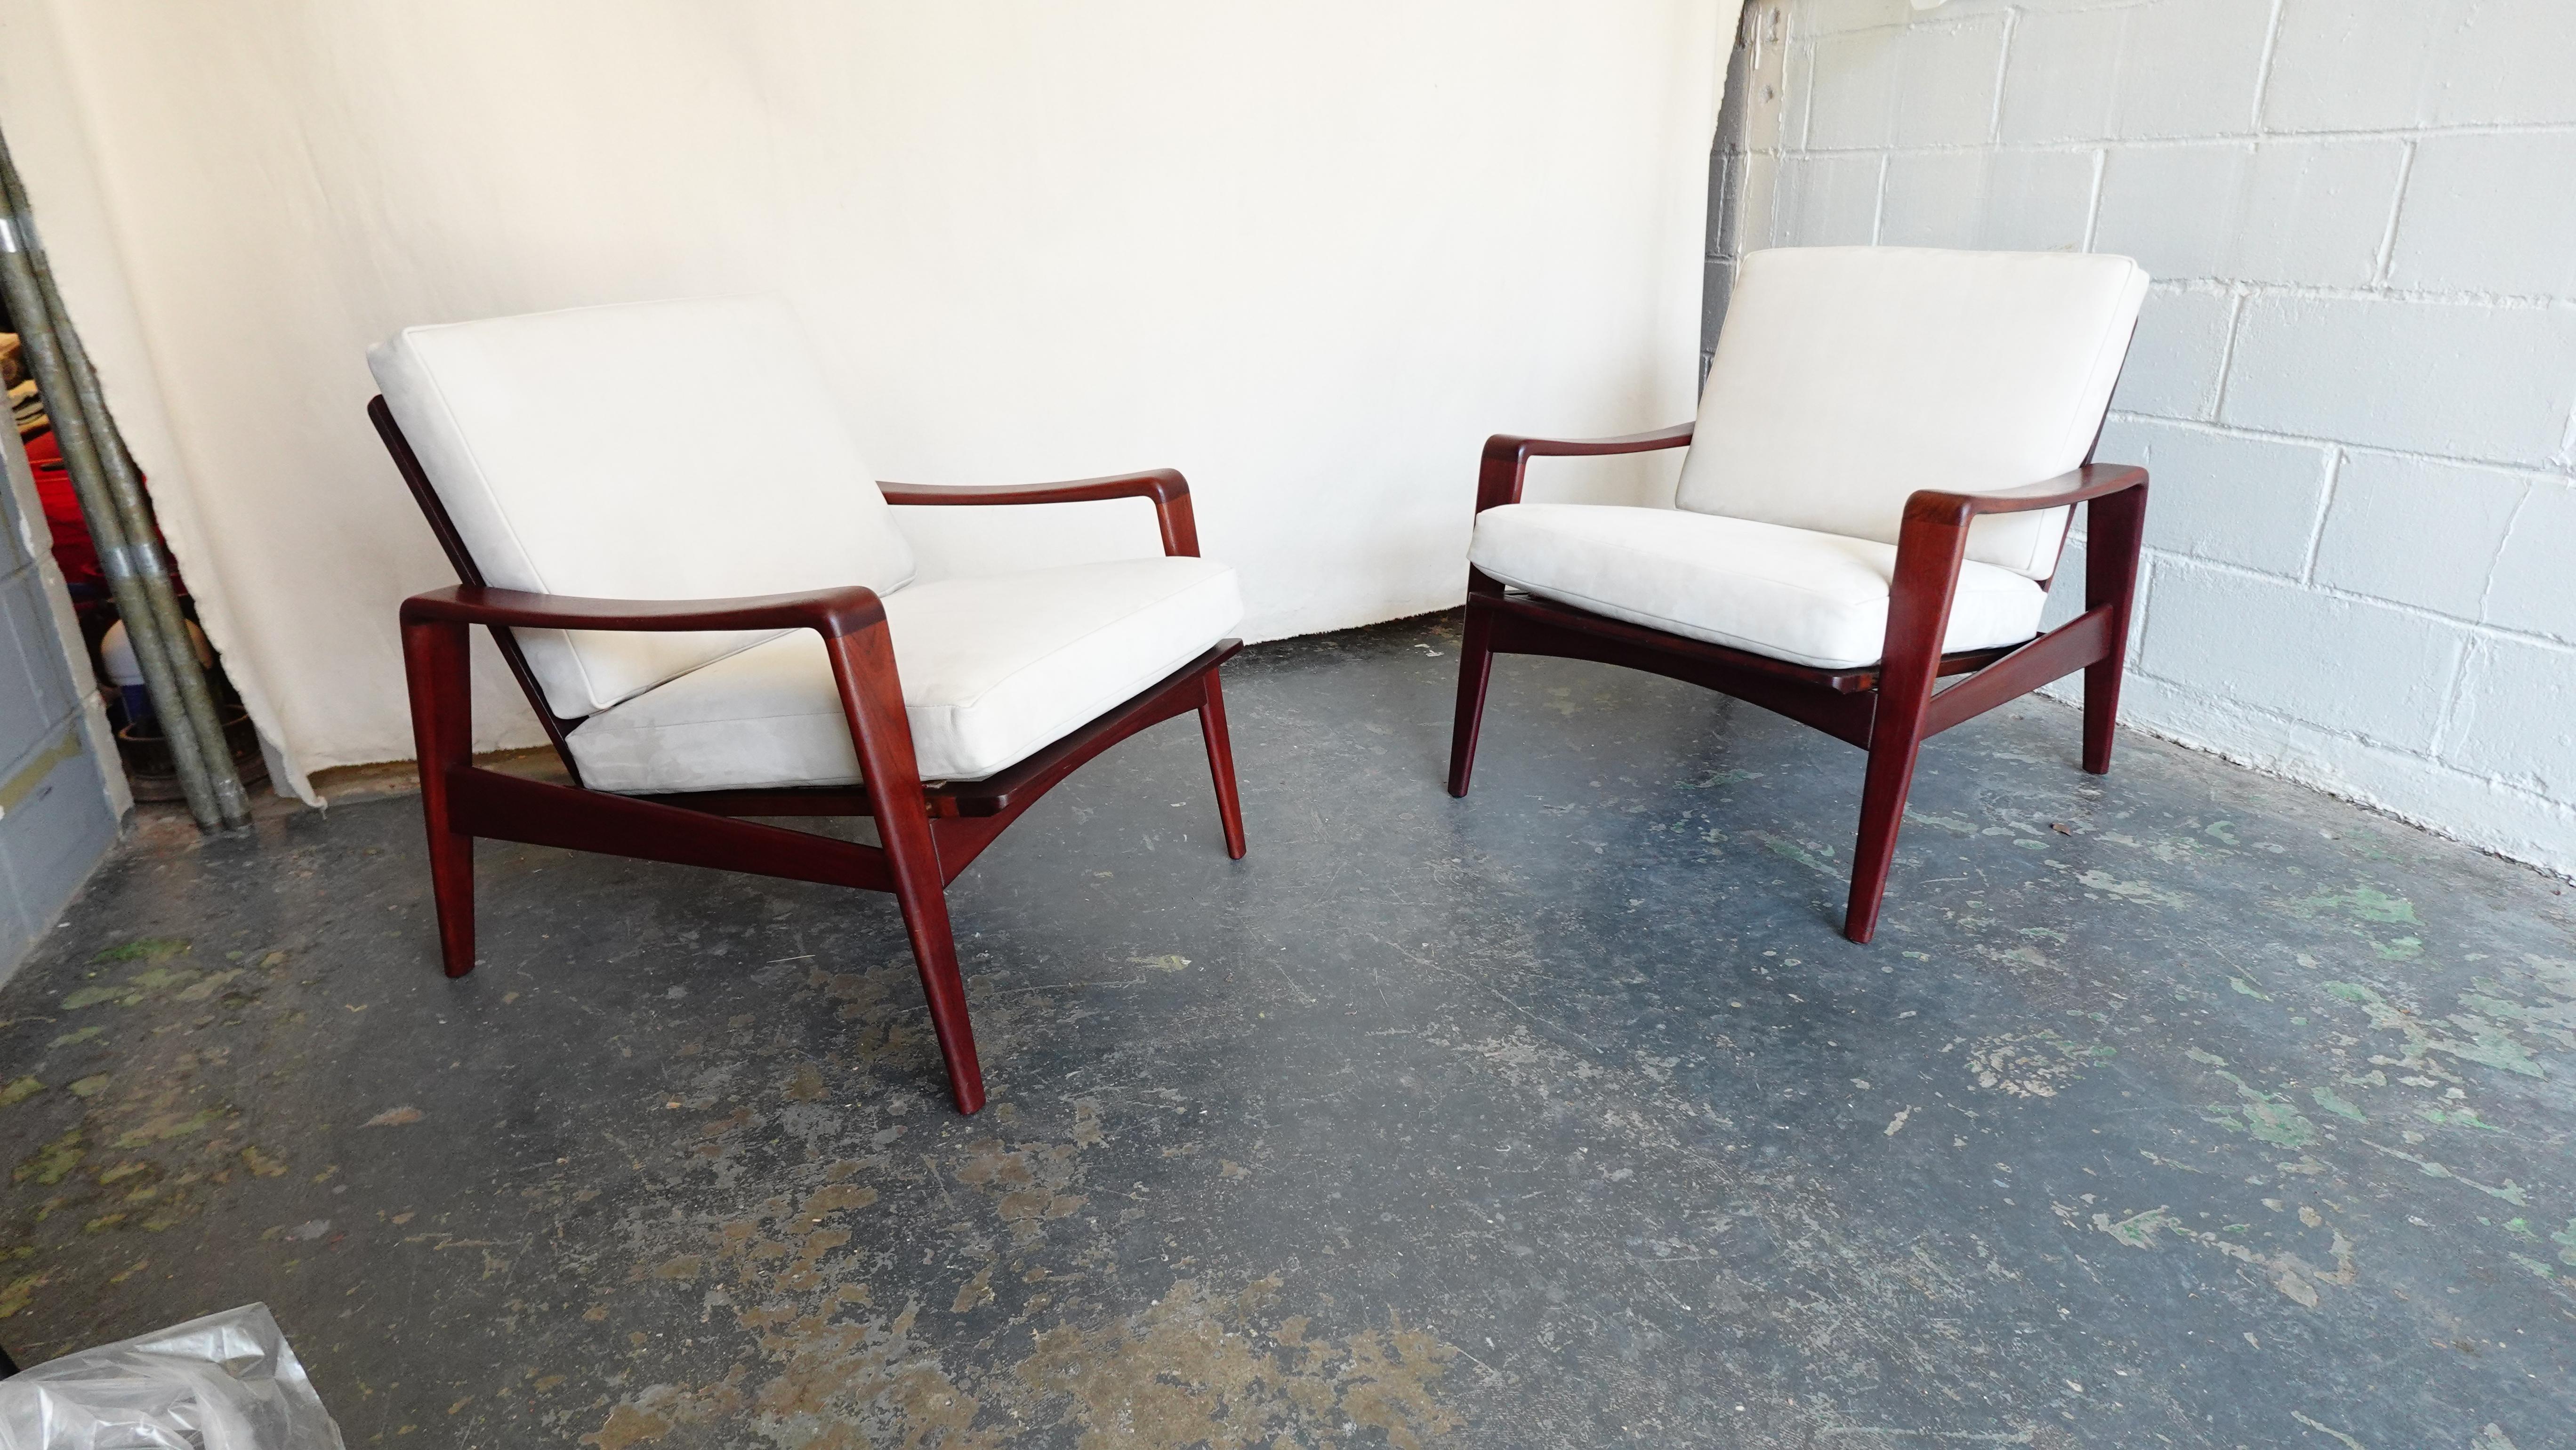 Pair of Arne Wahl Iverson Lounge Chairs for Komfort in Teak & Leather, 1960 For Sale 9